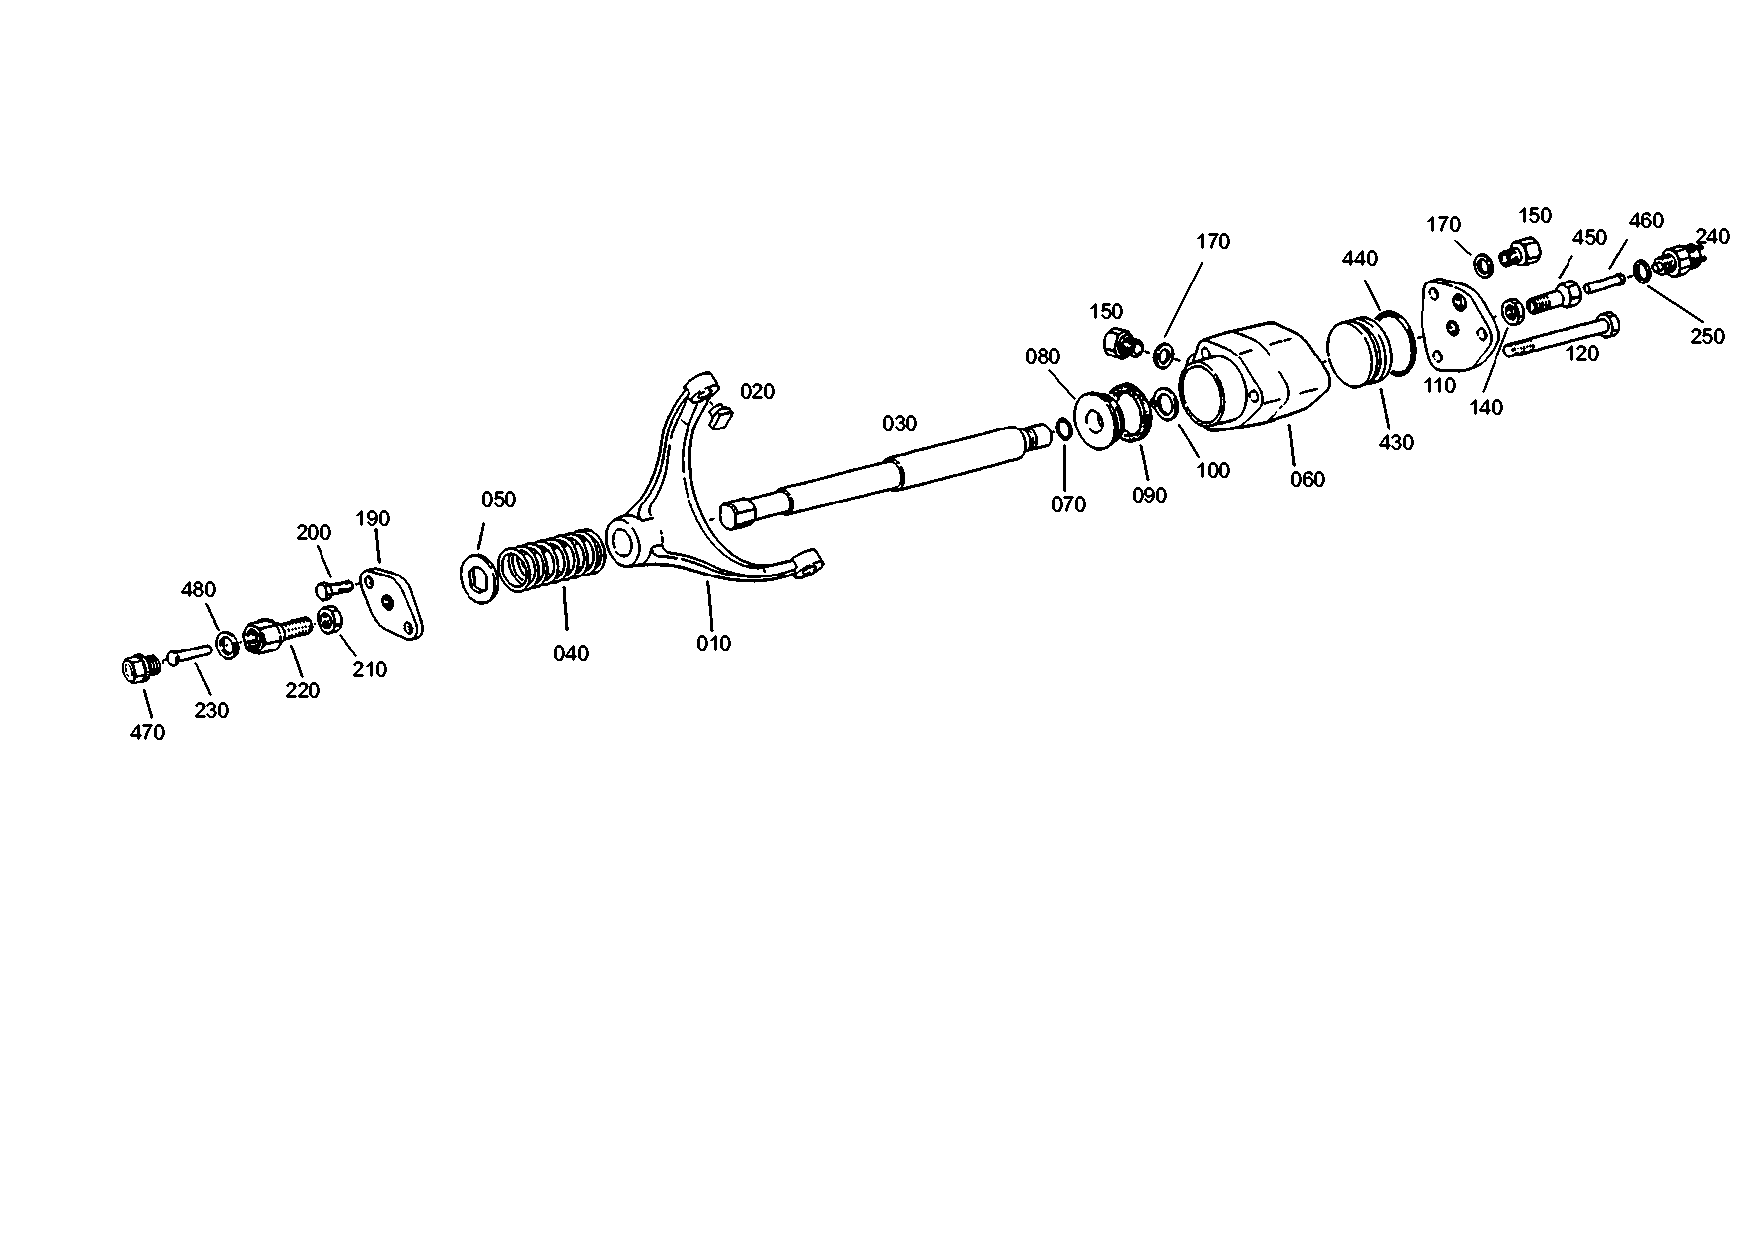 drawing for MARMON Herring MVG201120 - INPUT SHAFT (figure 1)